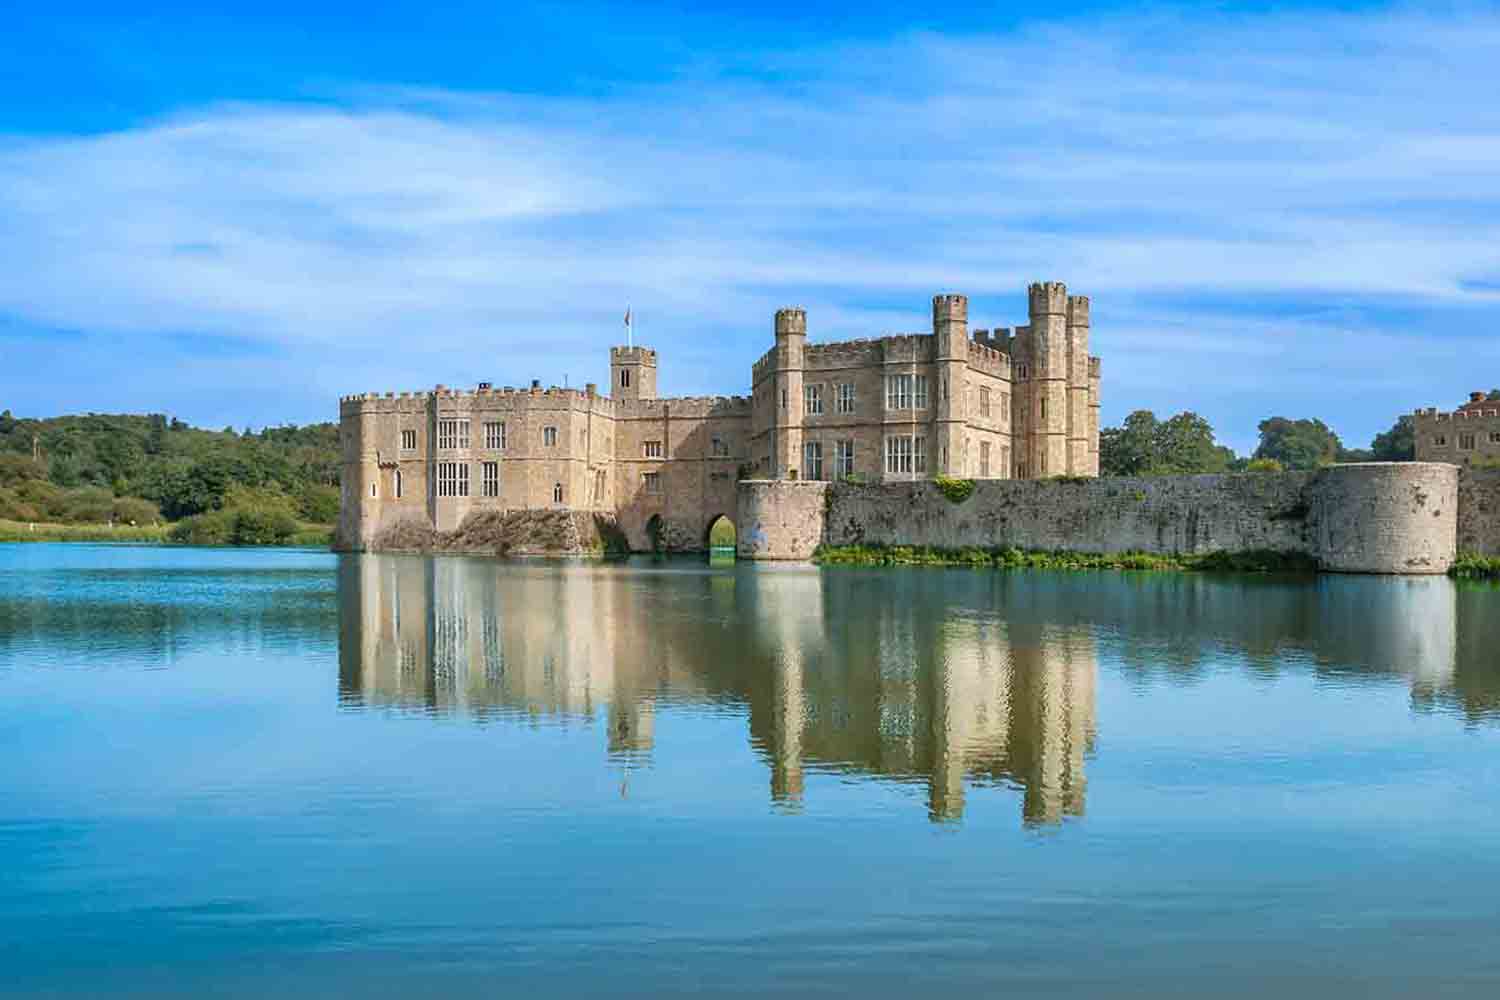 A landscape view of Leeds Castle reflecting on the lake